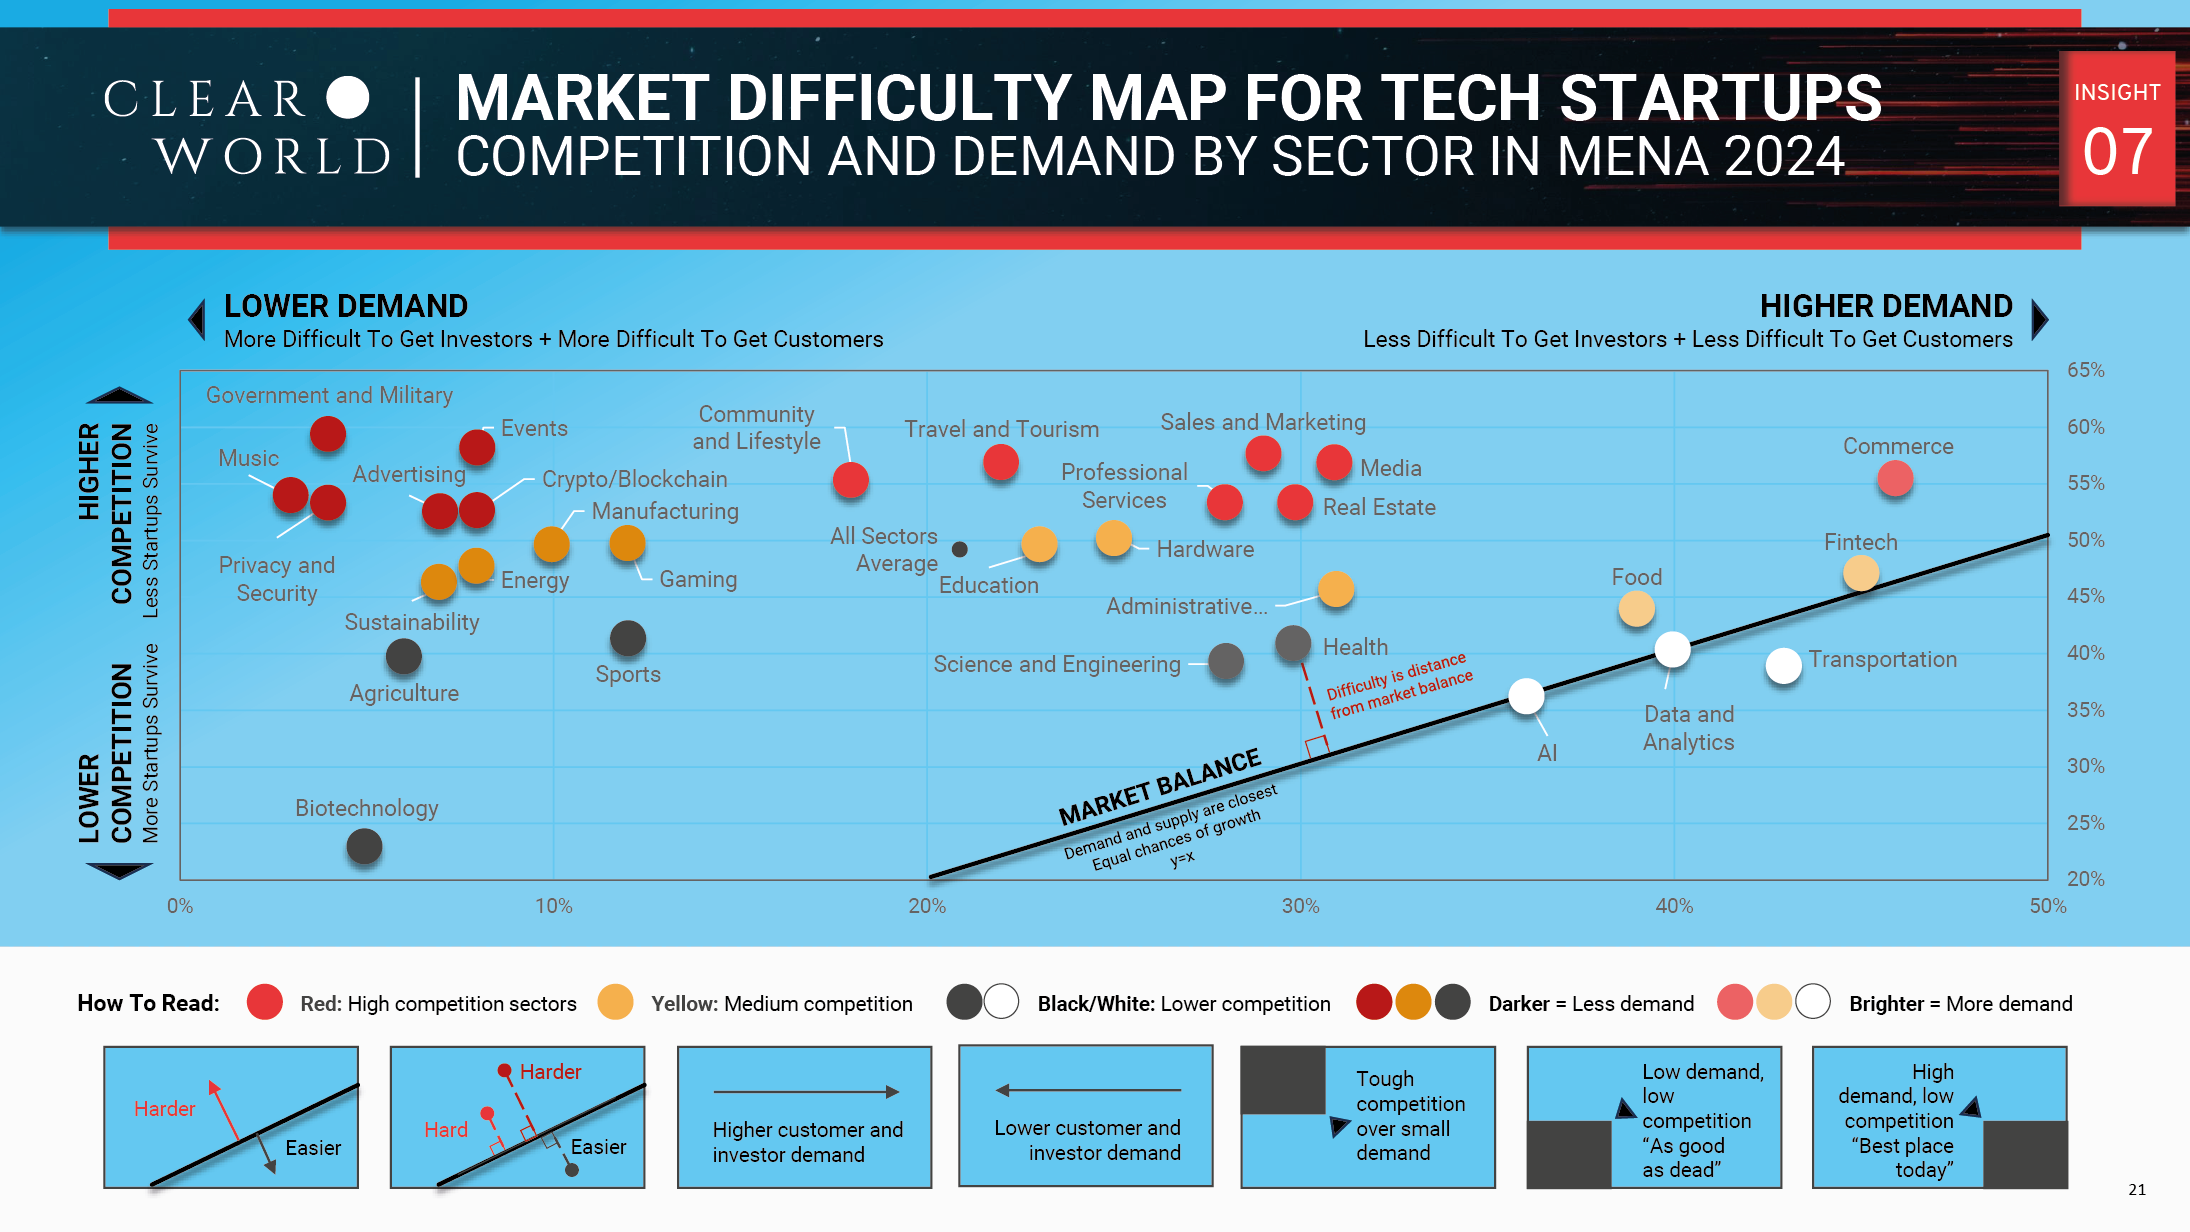 MENA Startup Market Difficulty Map by Sector 2024 - Clearworld